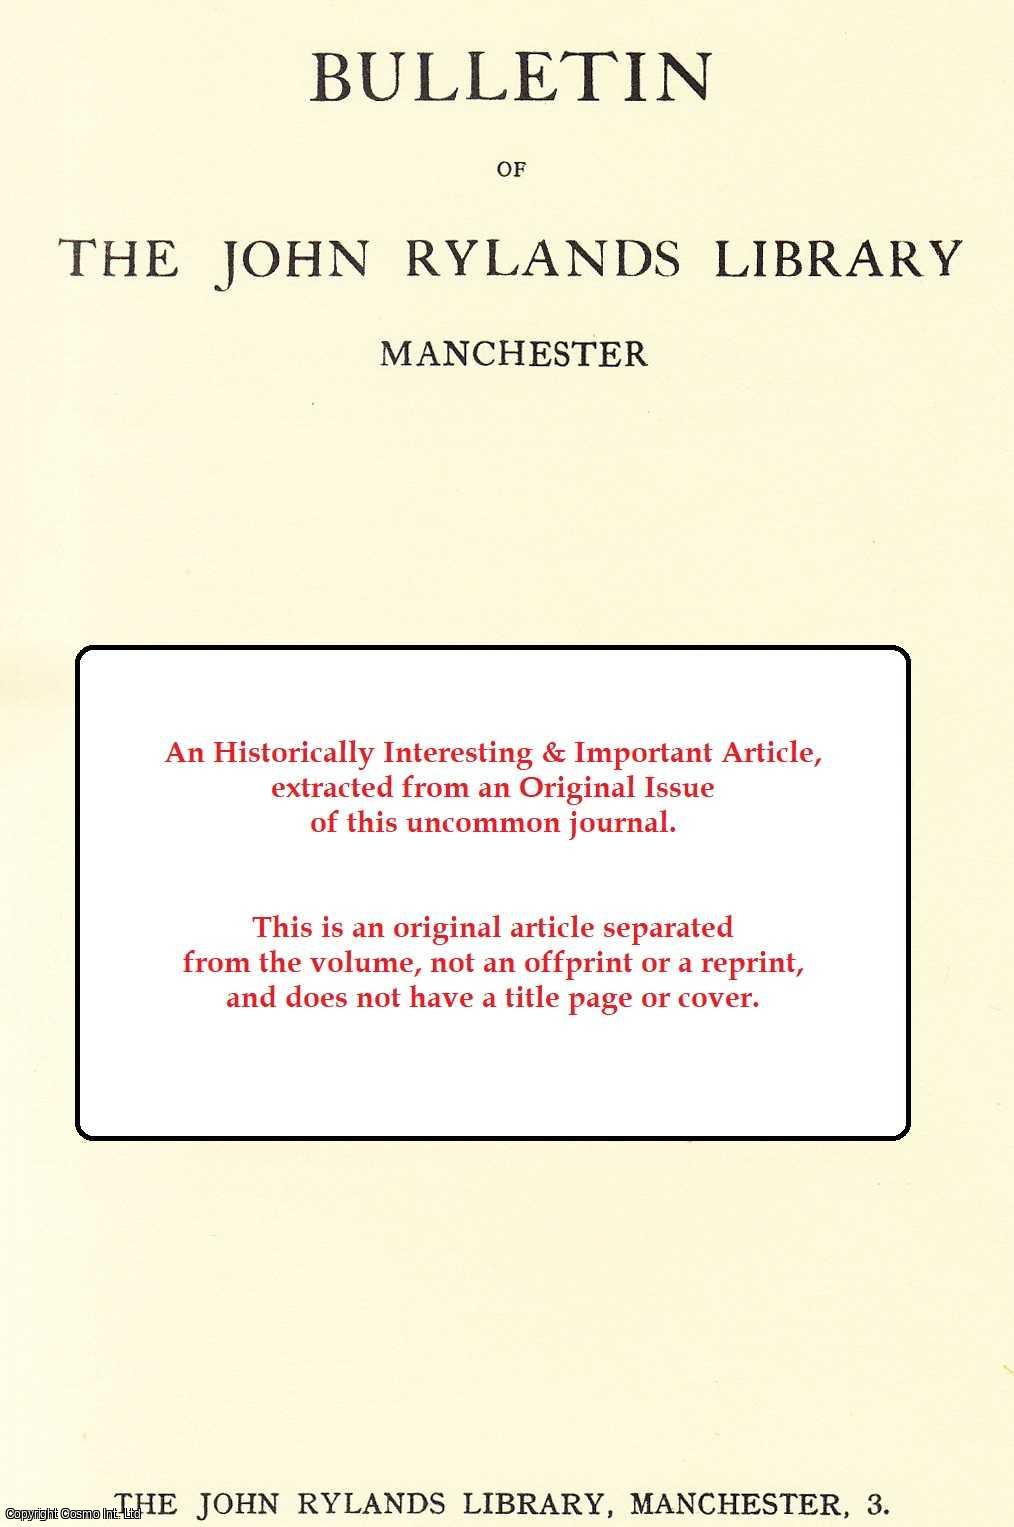 Duncan Keen, Sebastian Rahtz and Peter Ucko - Visualisation and Analysis of the Antiquarian Record in Archaeology. An original article from the Bulletin of the John Rylands Library Manchester; from the Issue, Computers and the Humanities, 1992.